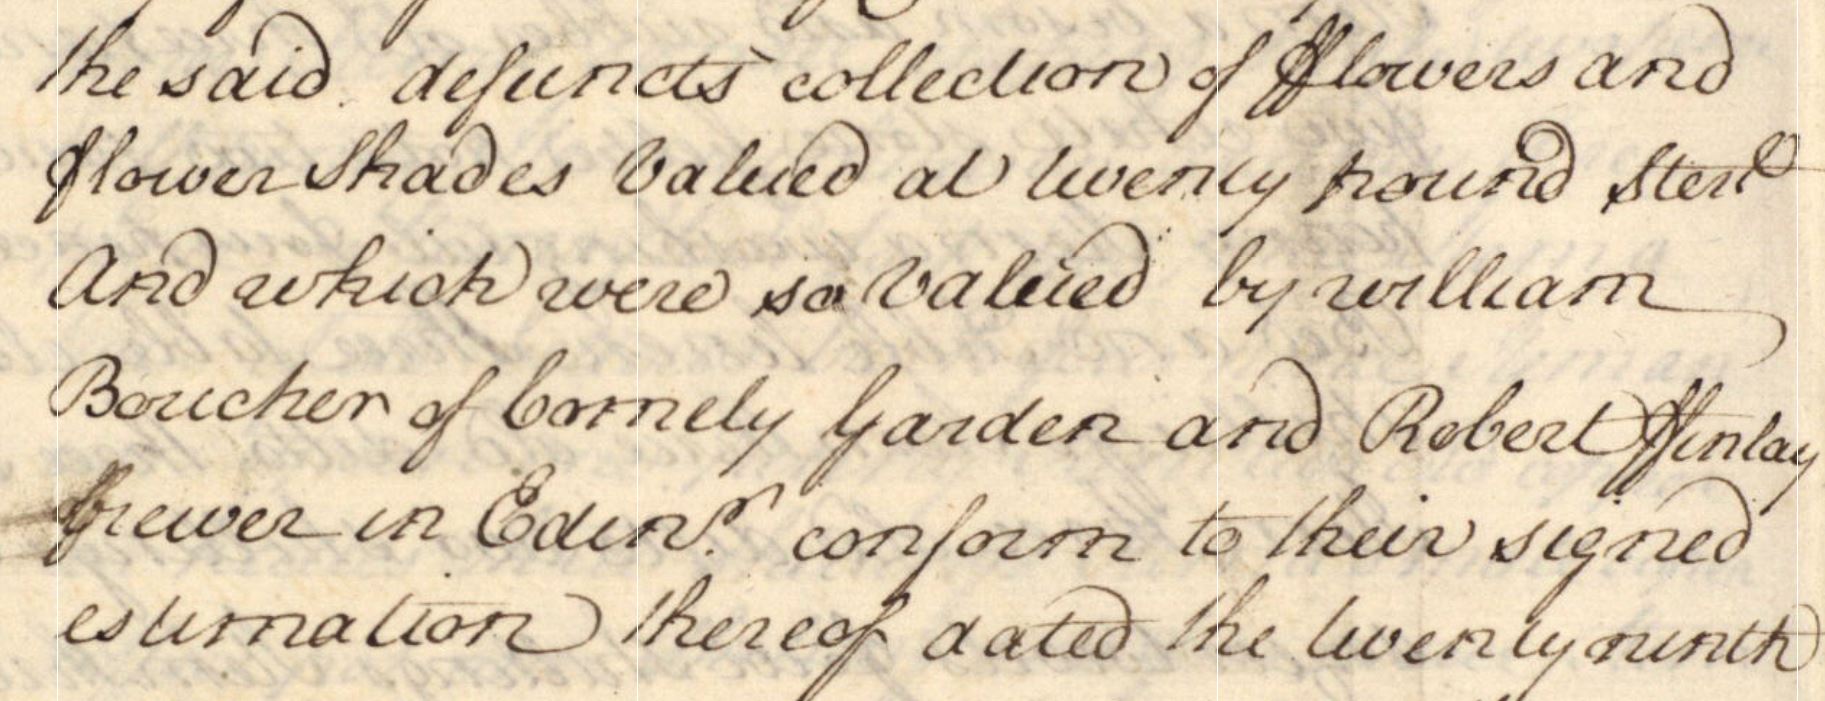 Extract of James Justice's will, registered at Edinburgh Commissary Court on September 2, 1763